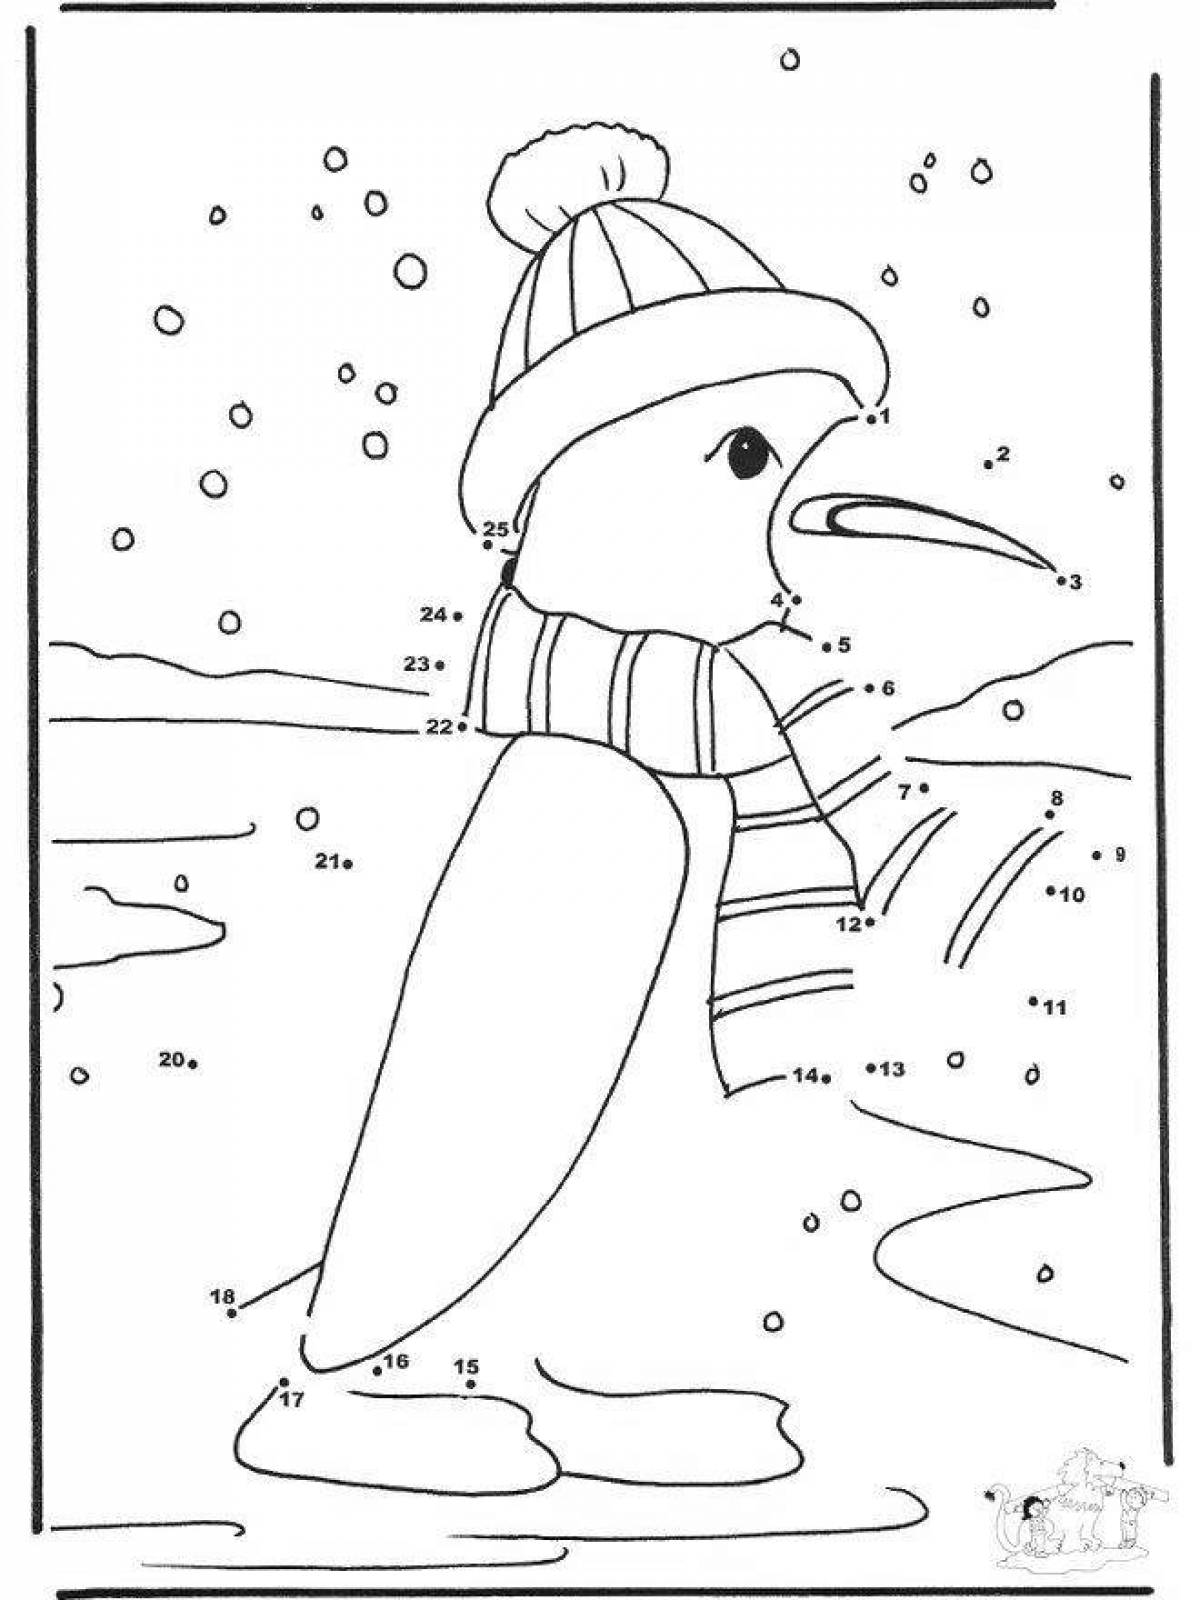 Shiny snowman coloring by numbers